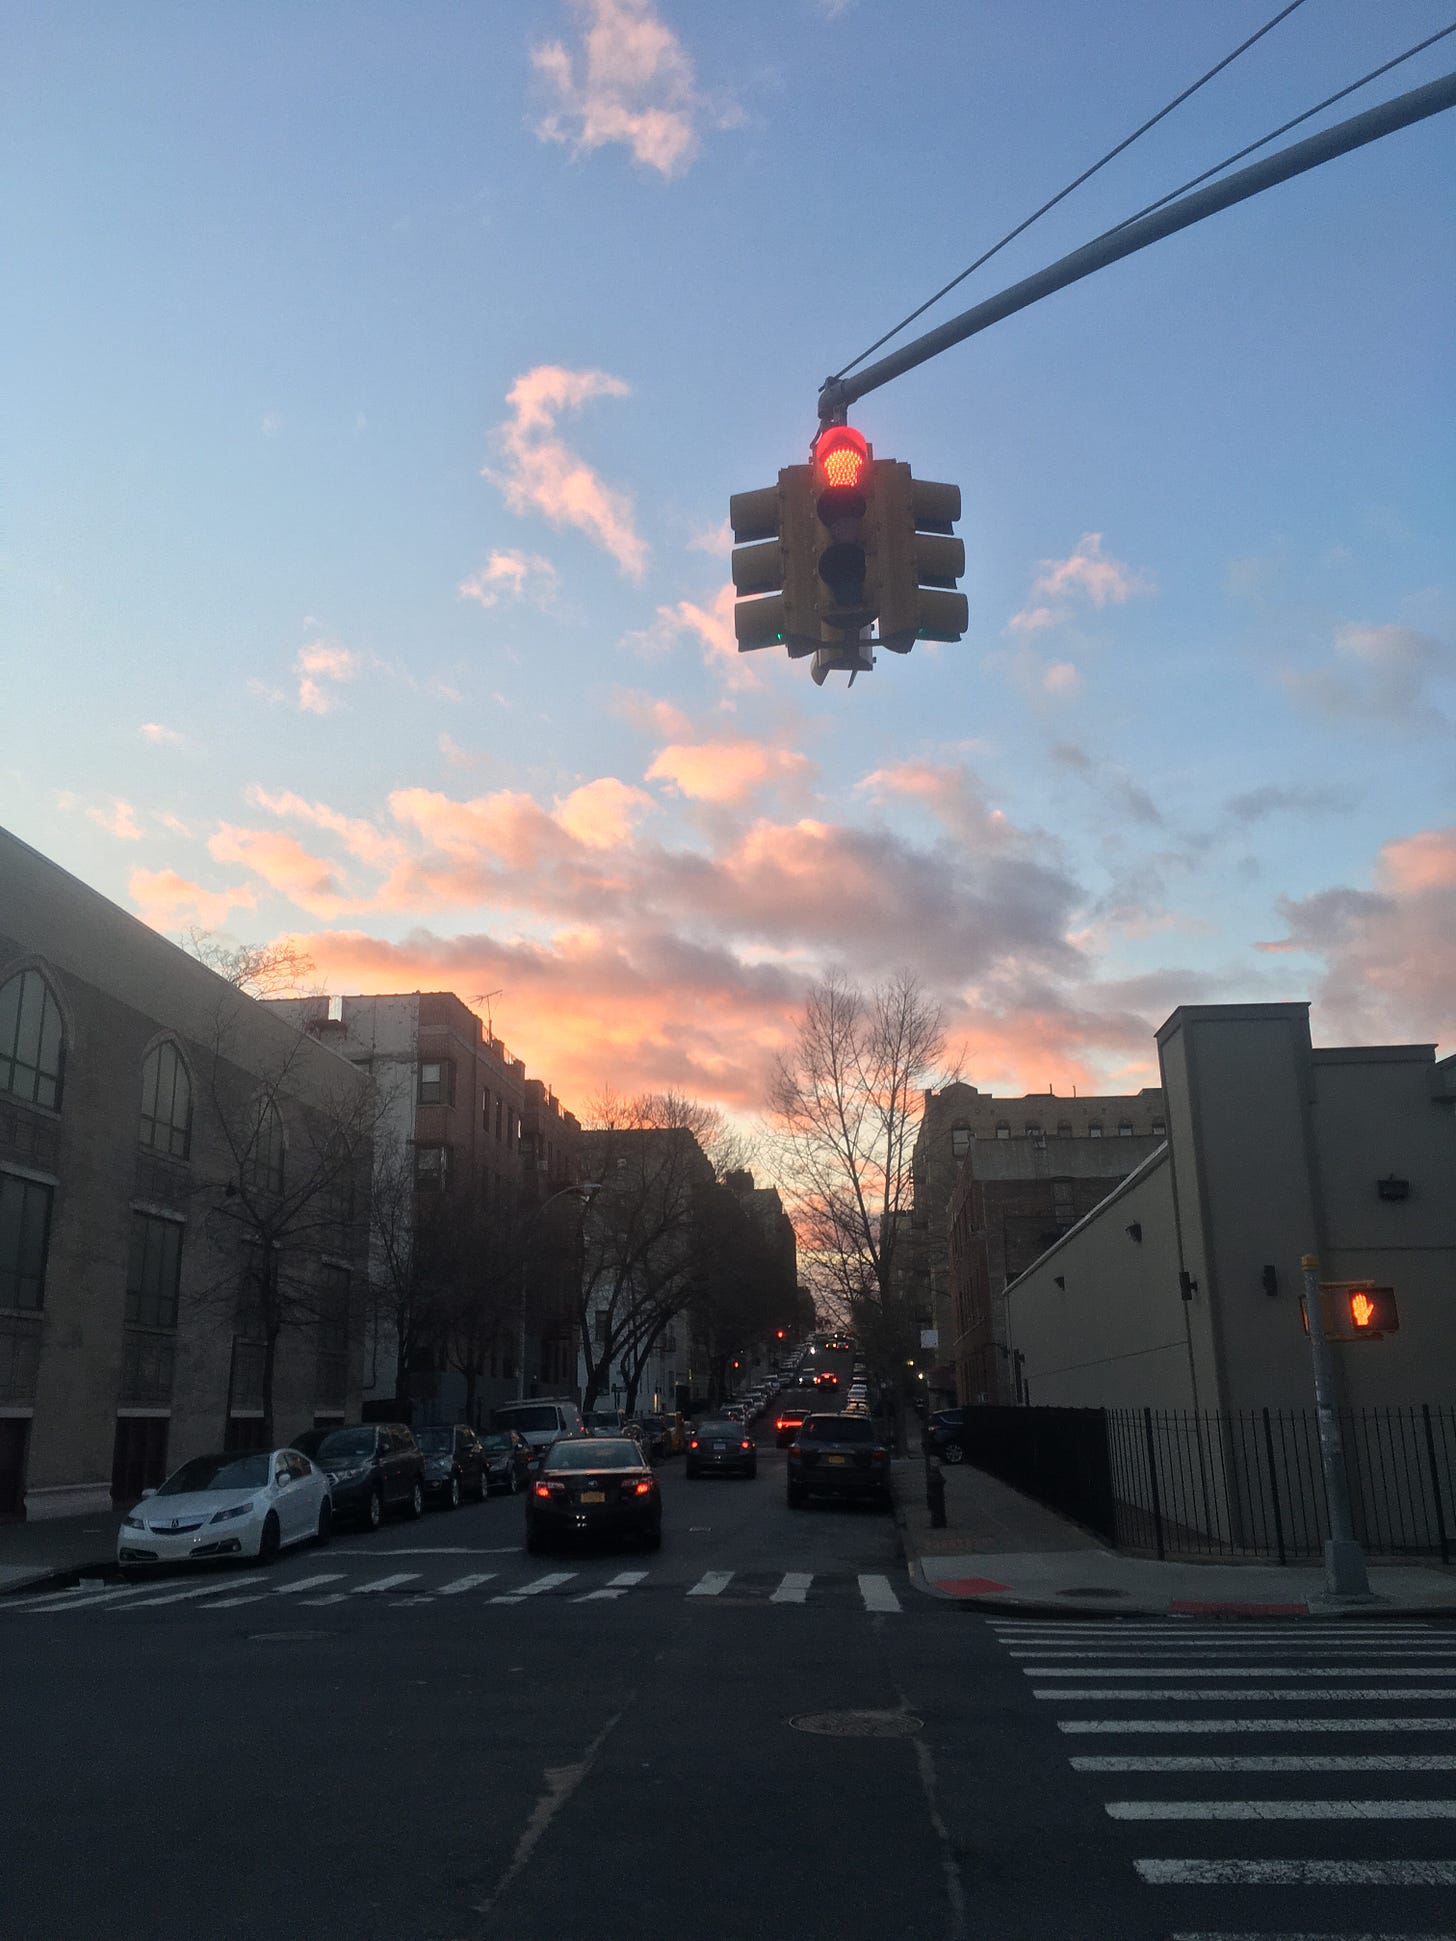 Photo by me: pink clouds at the bottom of a mostly clear sky. Below, cars in the street and a stop light at red